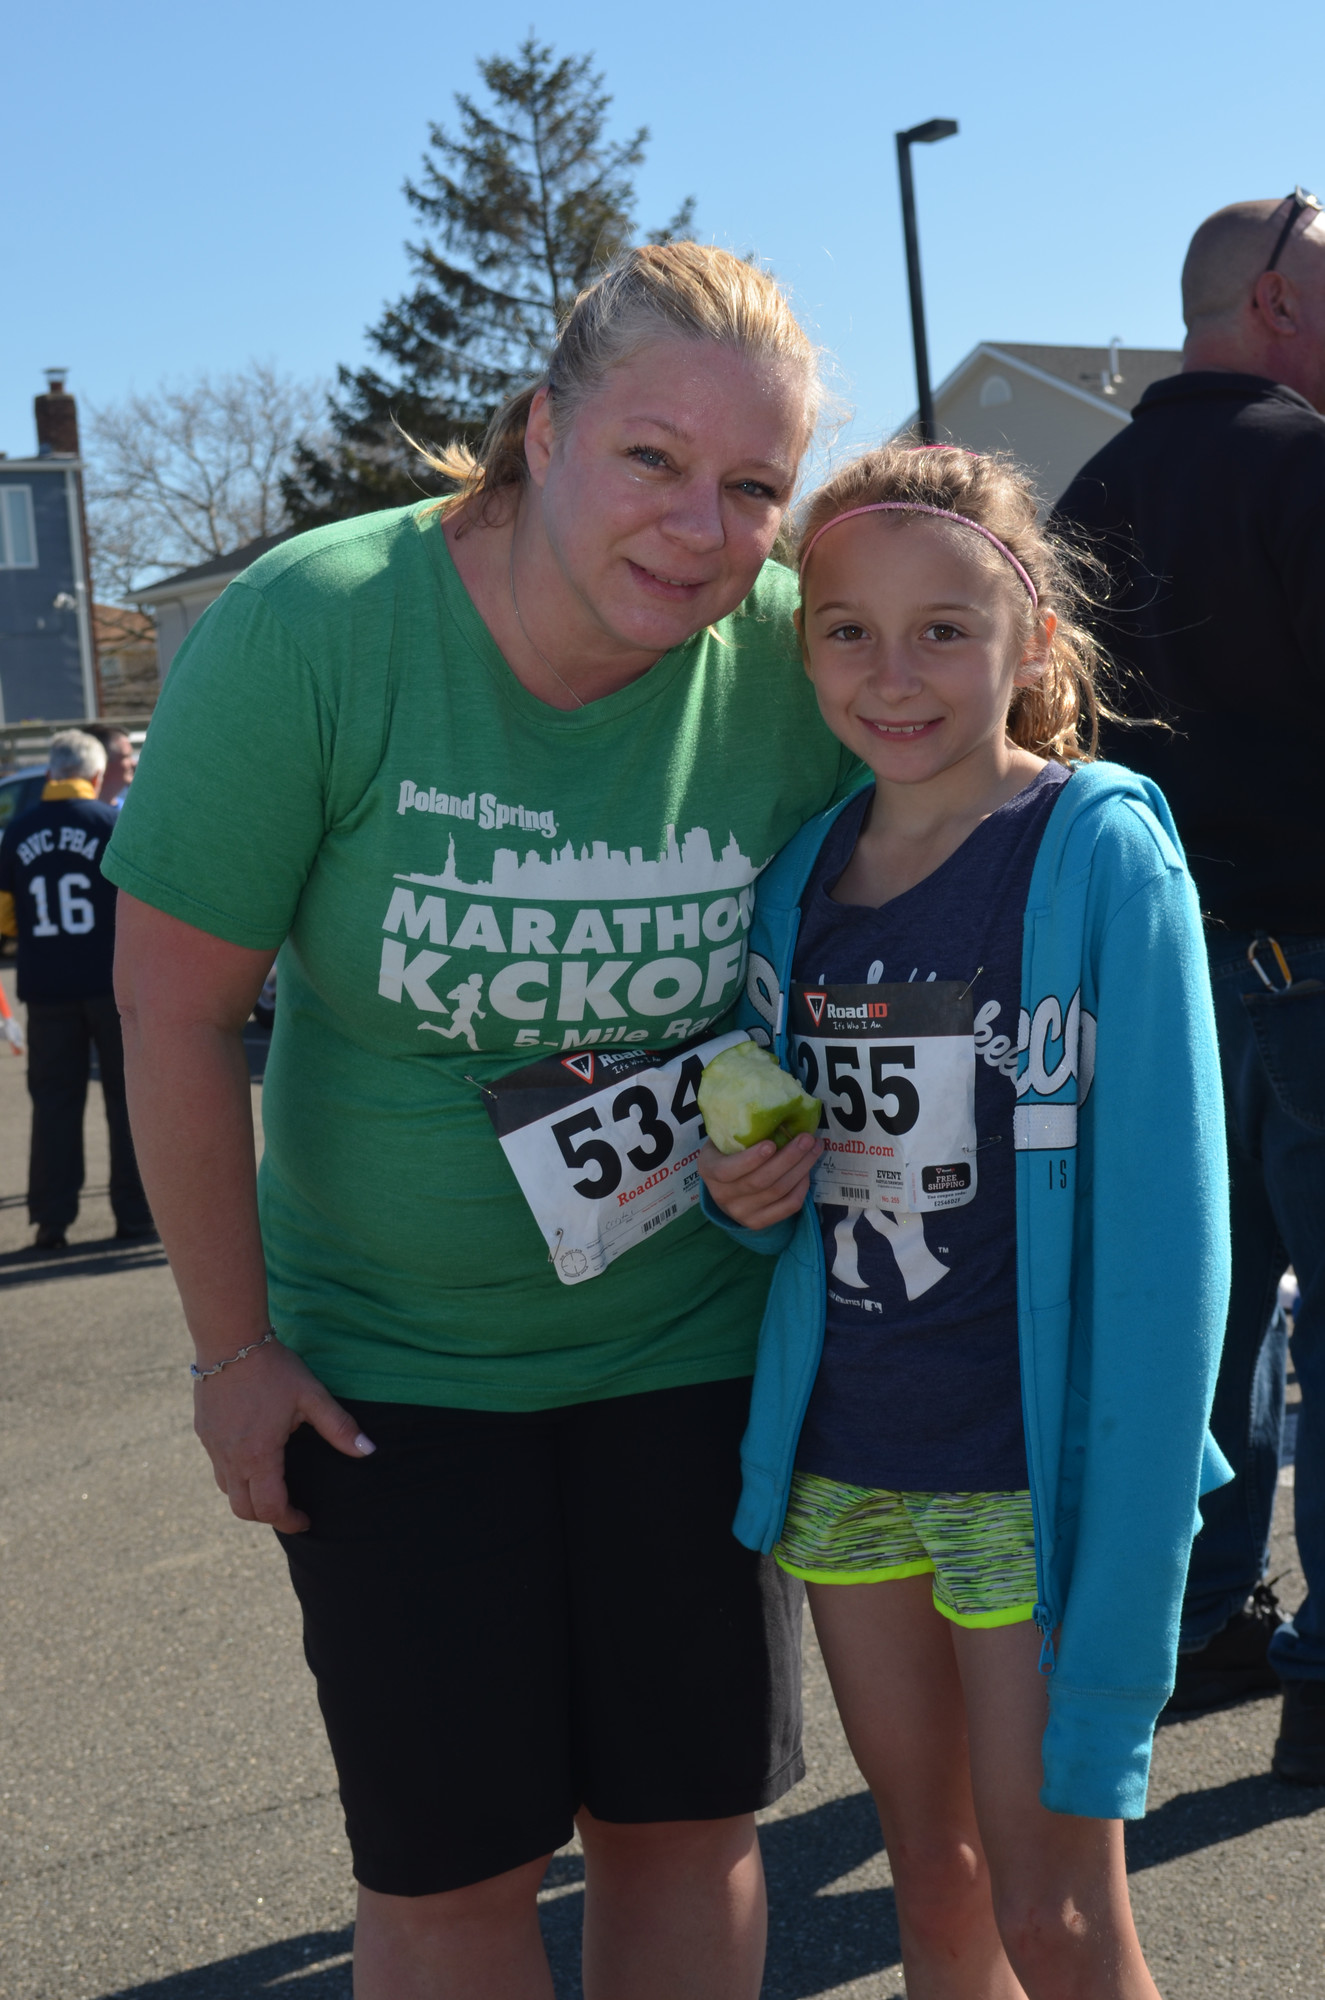 Crystal Chirichigno of Lynbrook with Mikayla Chirichigno (9 years old)